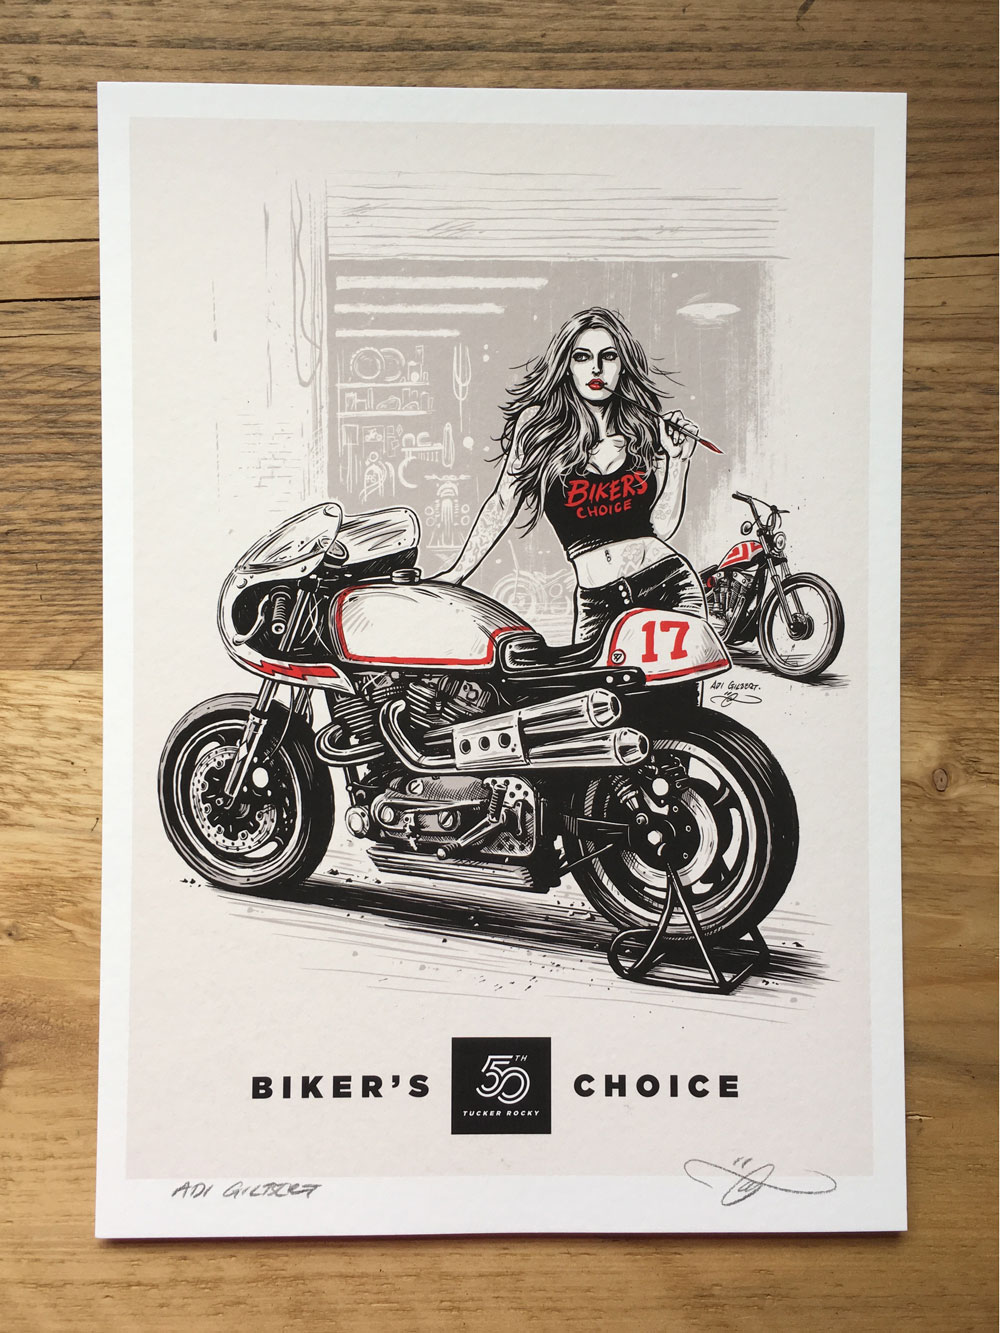 Bikers Choice (with logo / title) - By Adi Gilbert